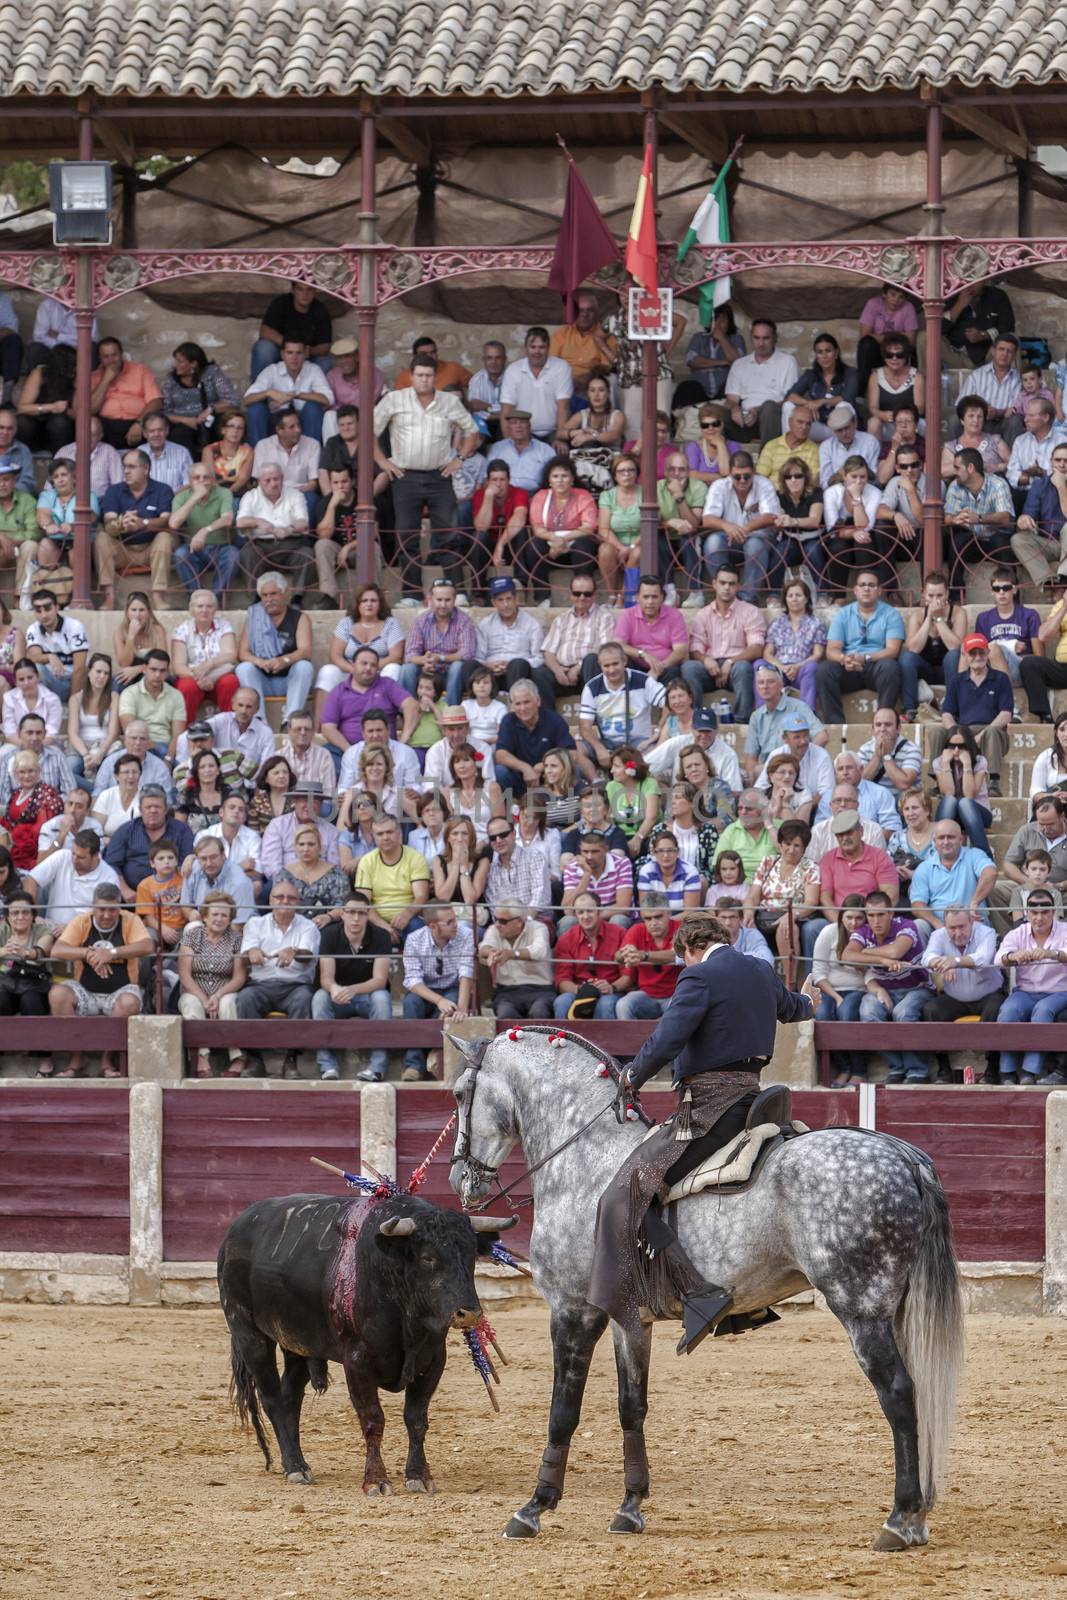 Ubeda, Jaen province, SPAIN - 2 october 2010: Spanish bullfighter Fermin Bohorquez bullfighting in front of the brave bull with its horse, the public is looking attentively at the toreador in Ubeda, Jaen province, Spain